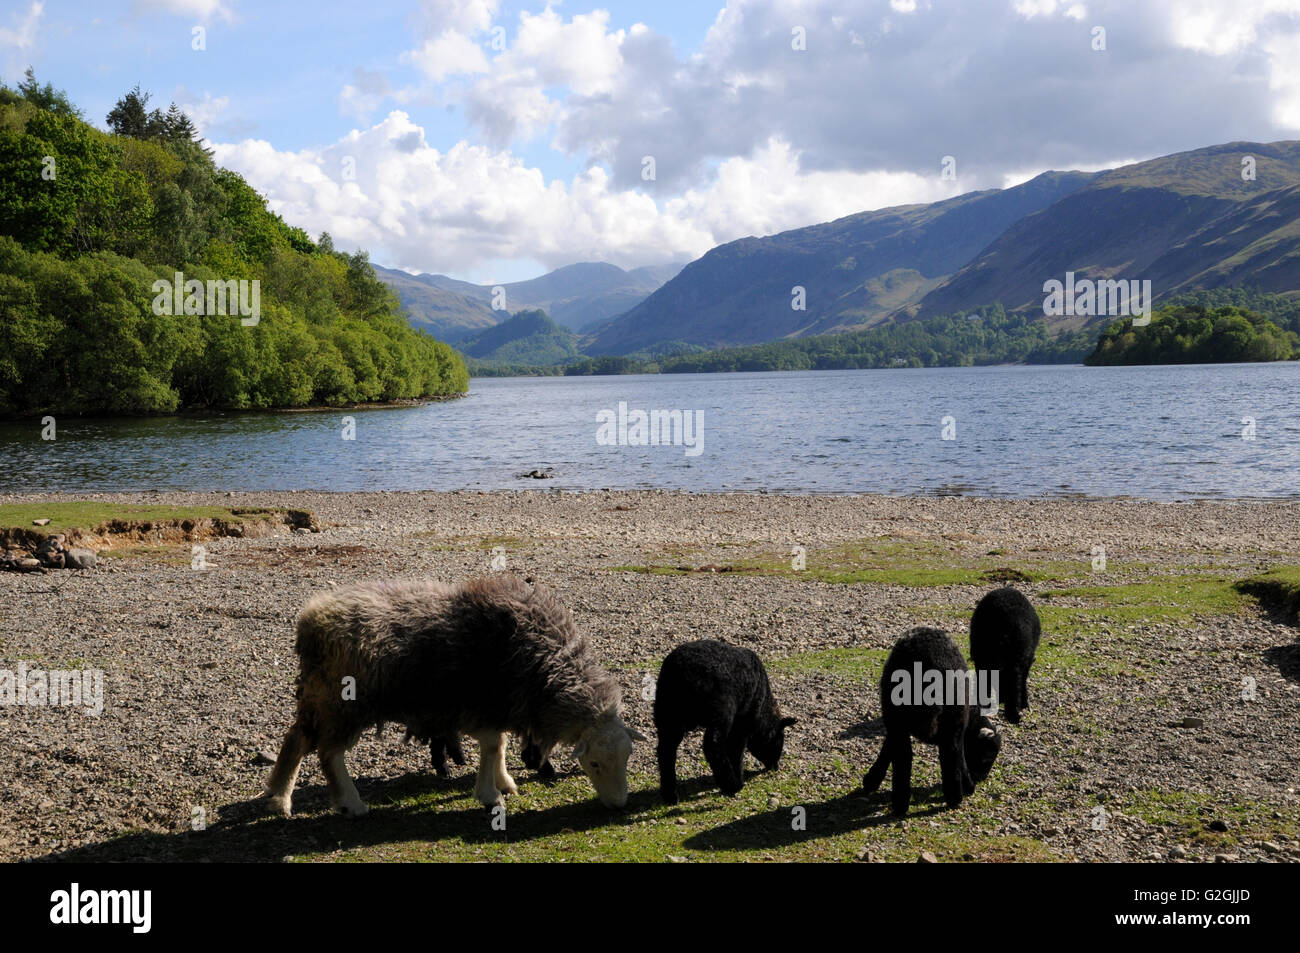 A Herdwick ewe and lambs graze on the shores of Derwentwater in the English Lake District. Herdwicks are typical Lakeland sheep. Stock Photo